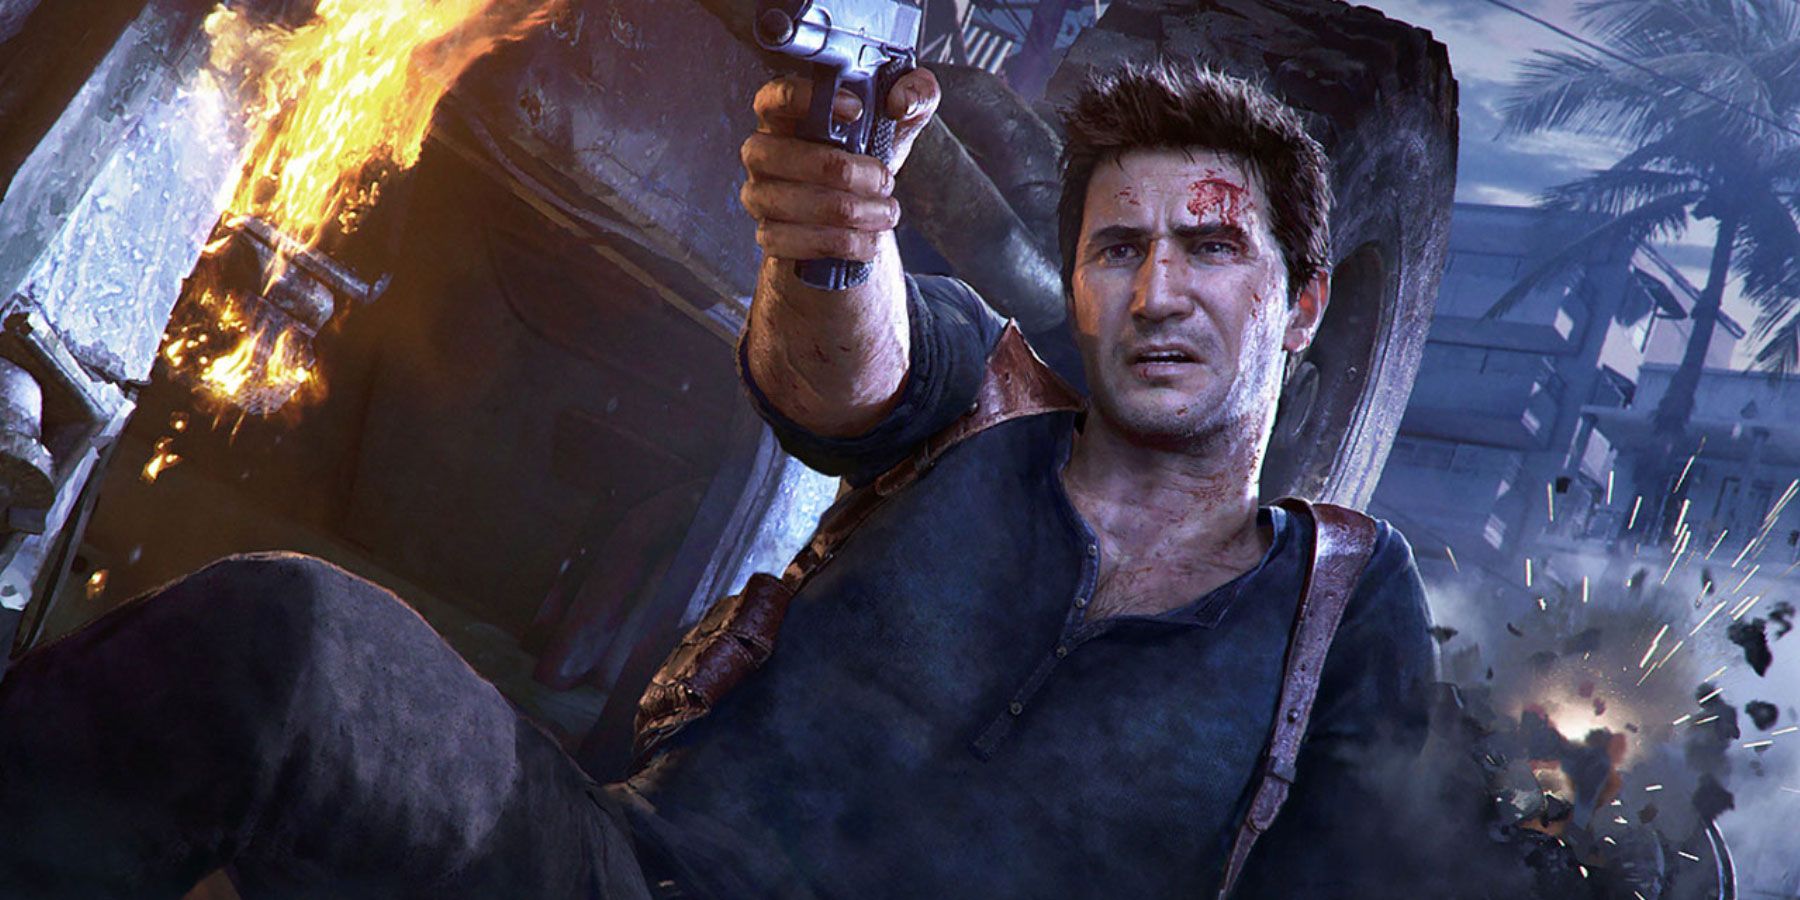 These Classic Action Movie Franchises Could be Revitalized as Video Games